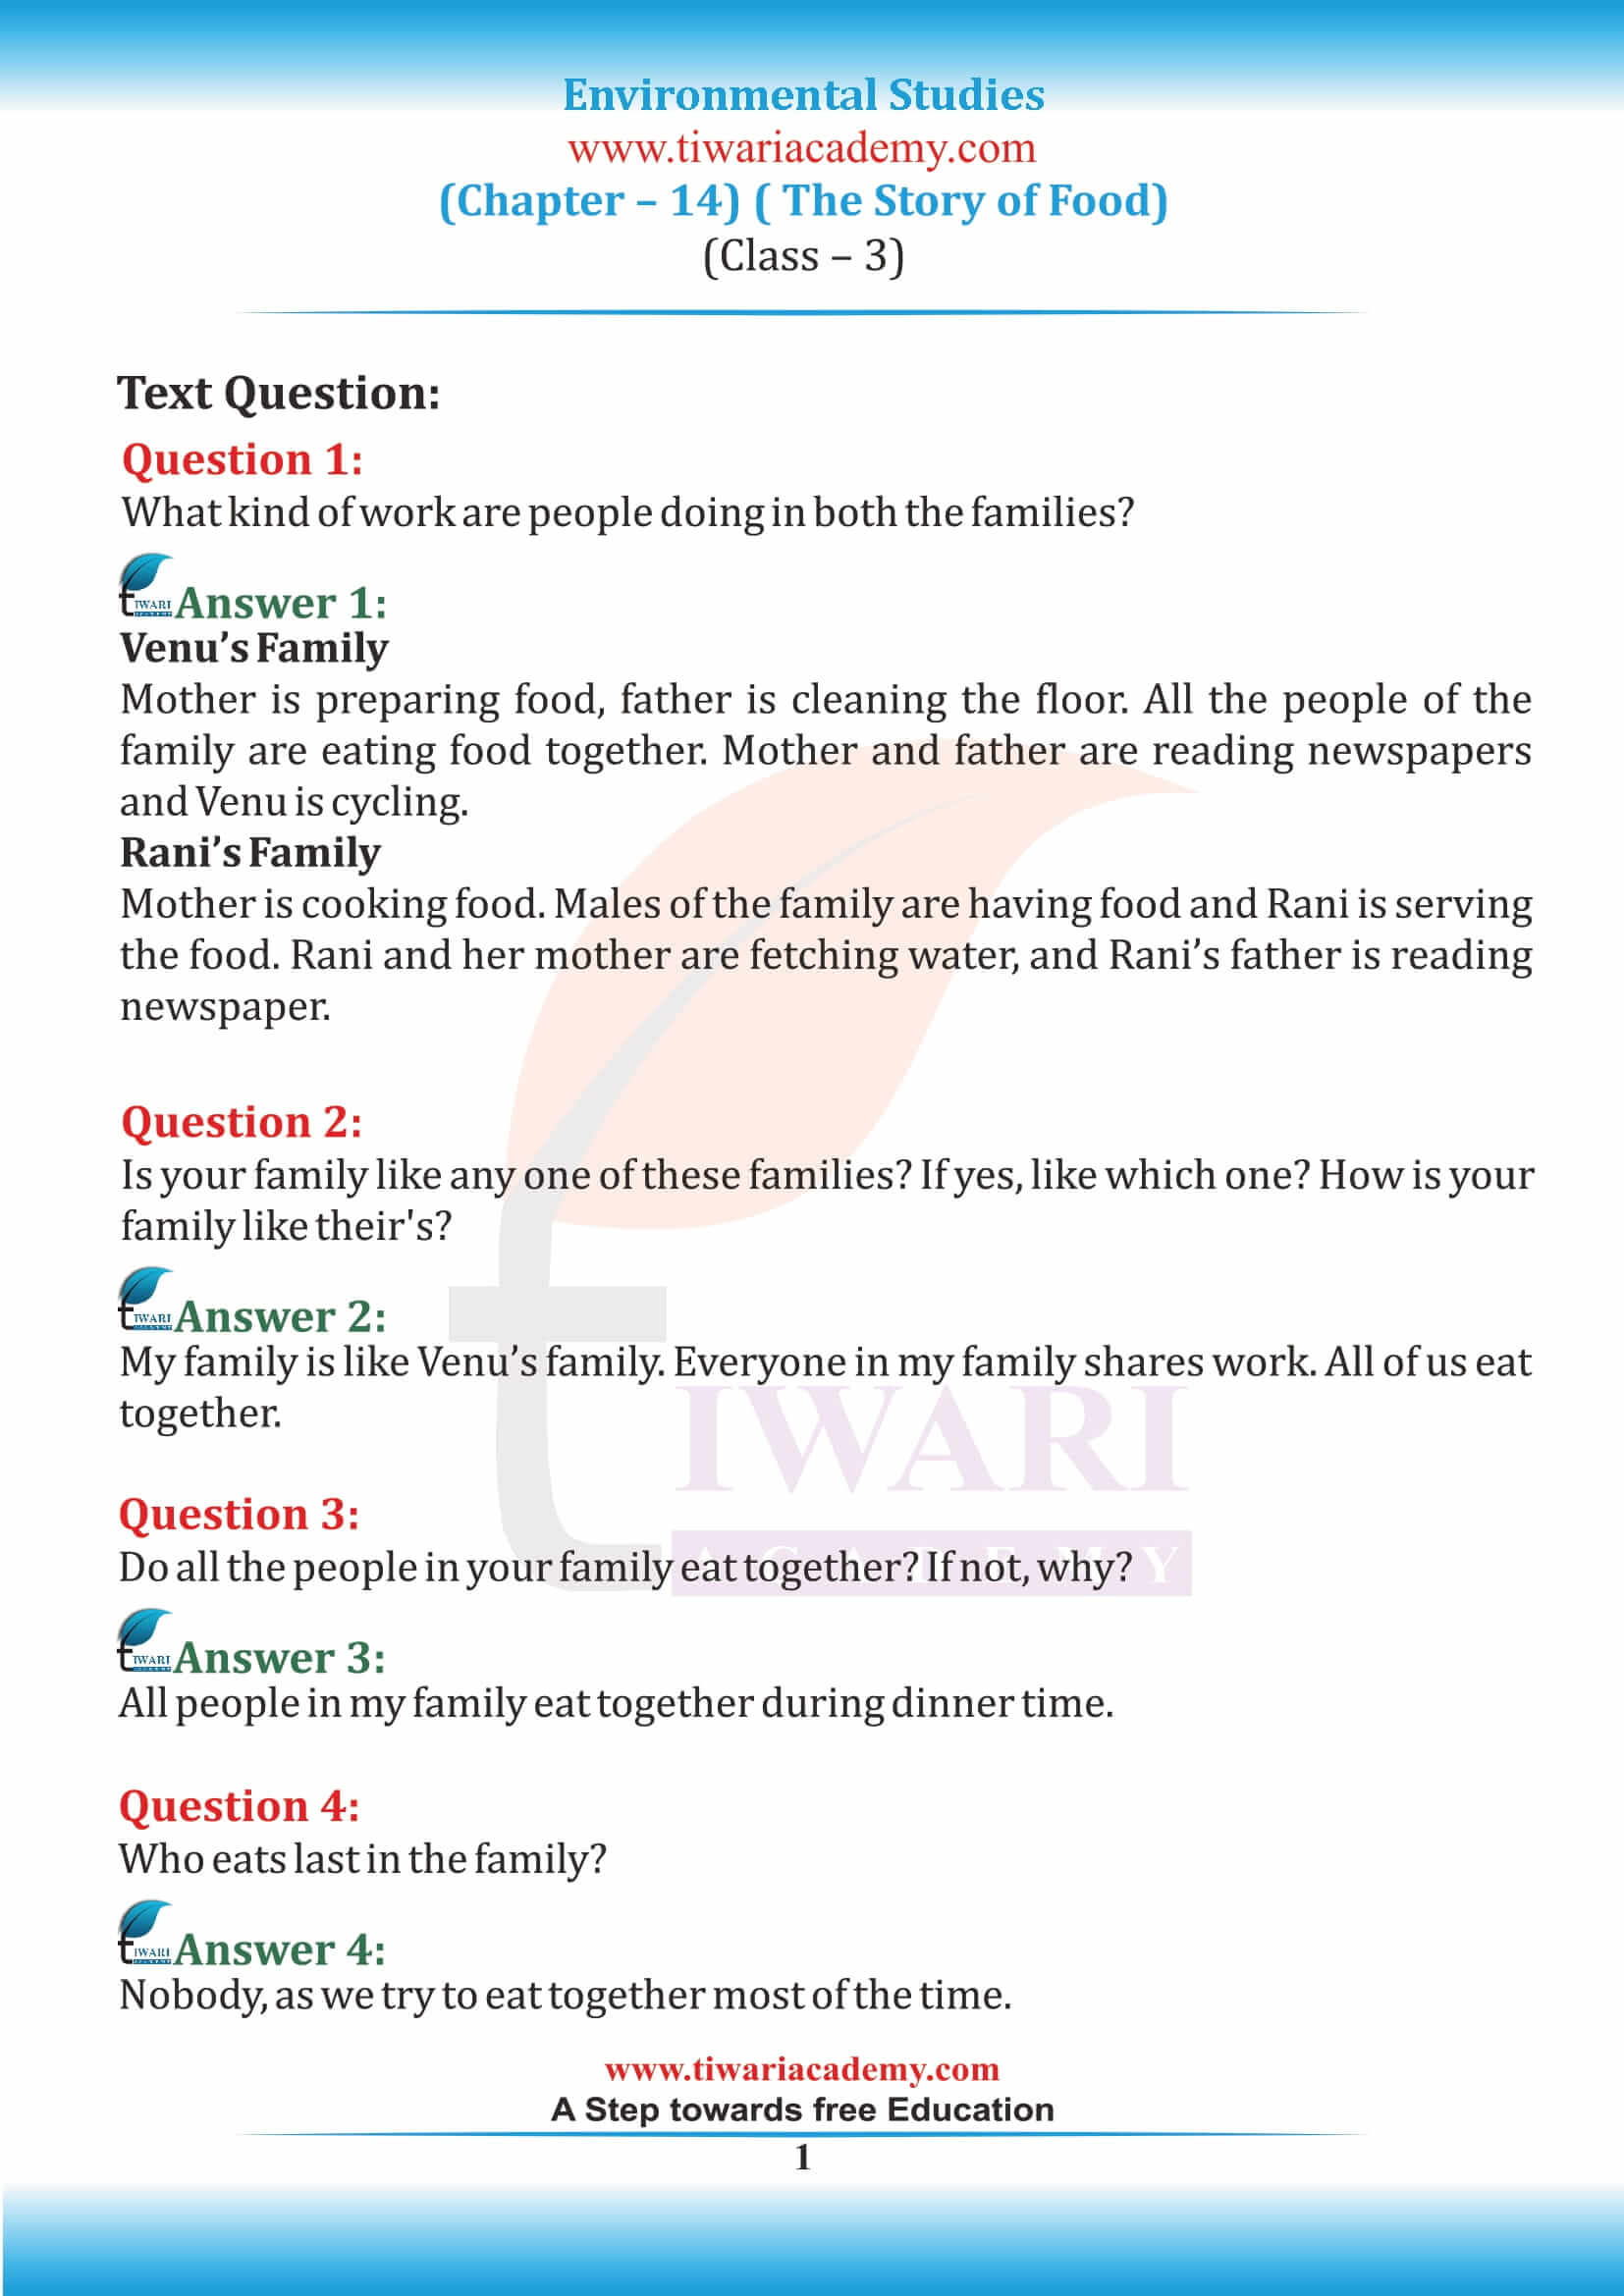 NCERT Solutions for Class 3 EVS Chapter 14 The Story of Food